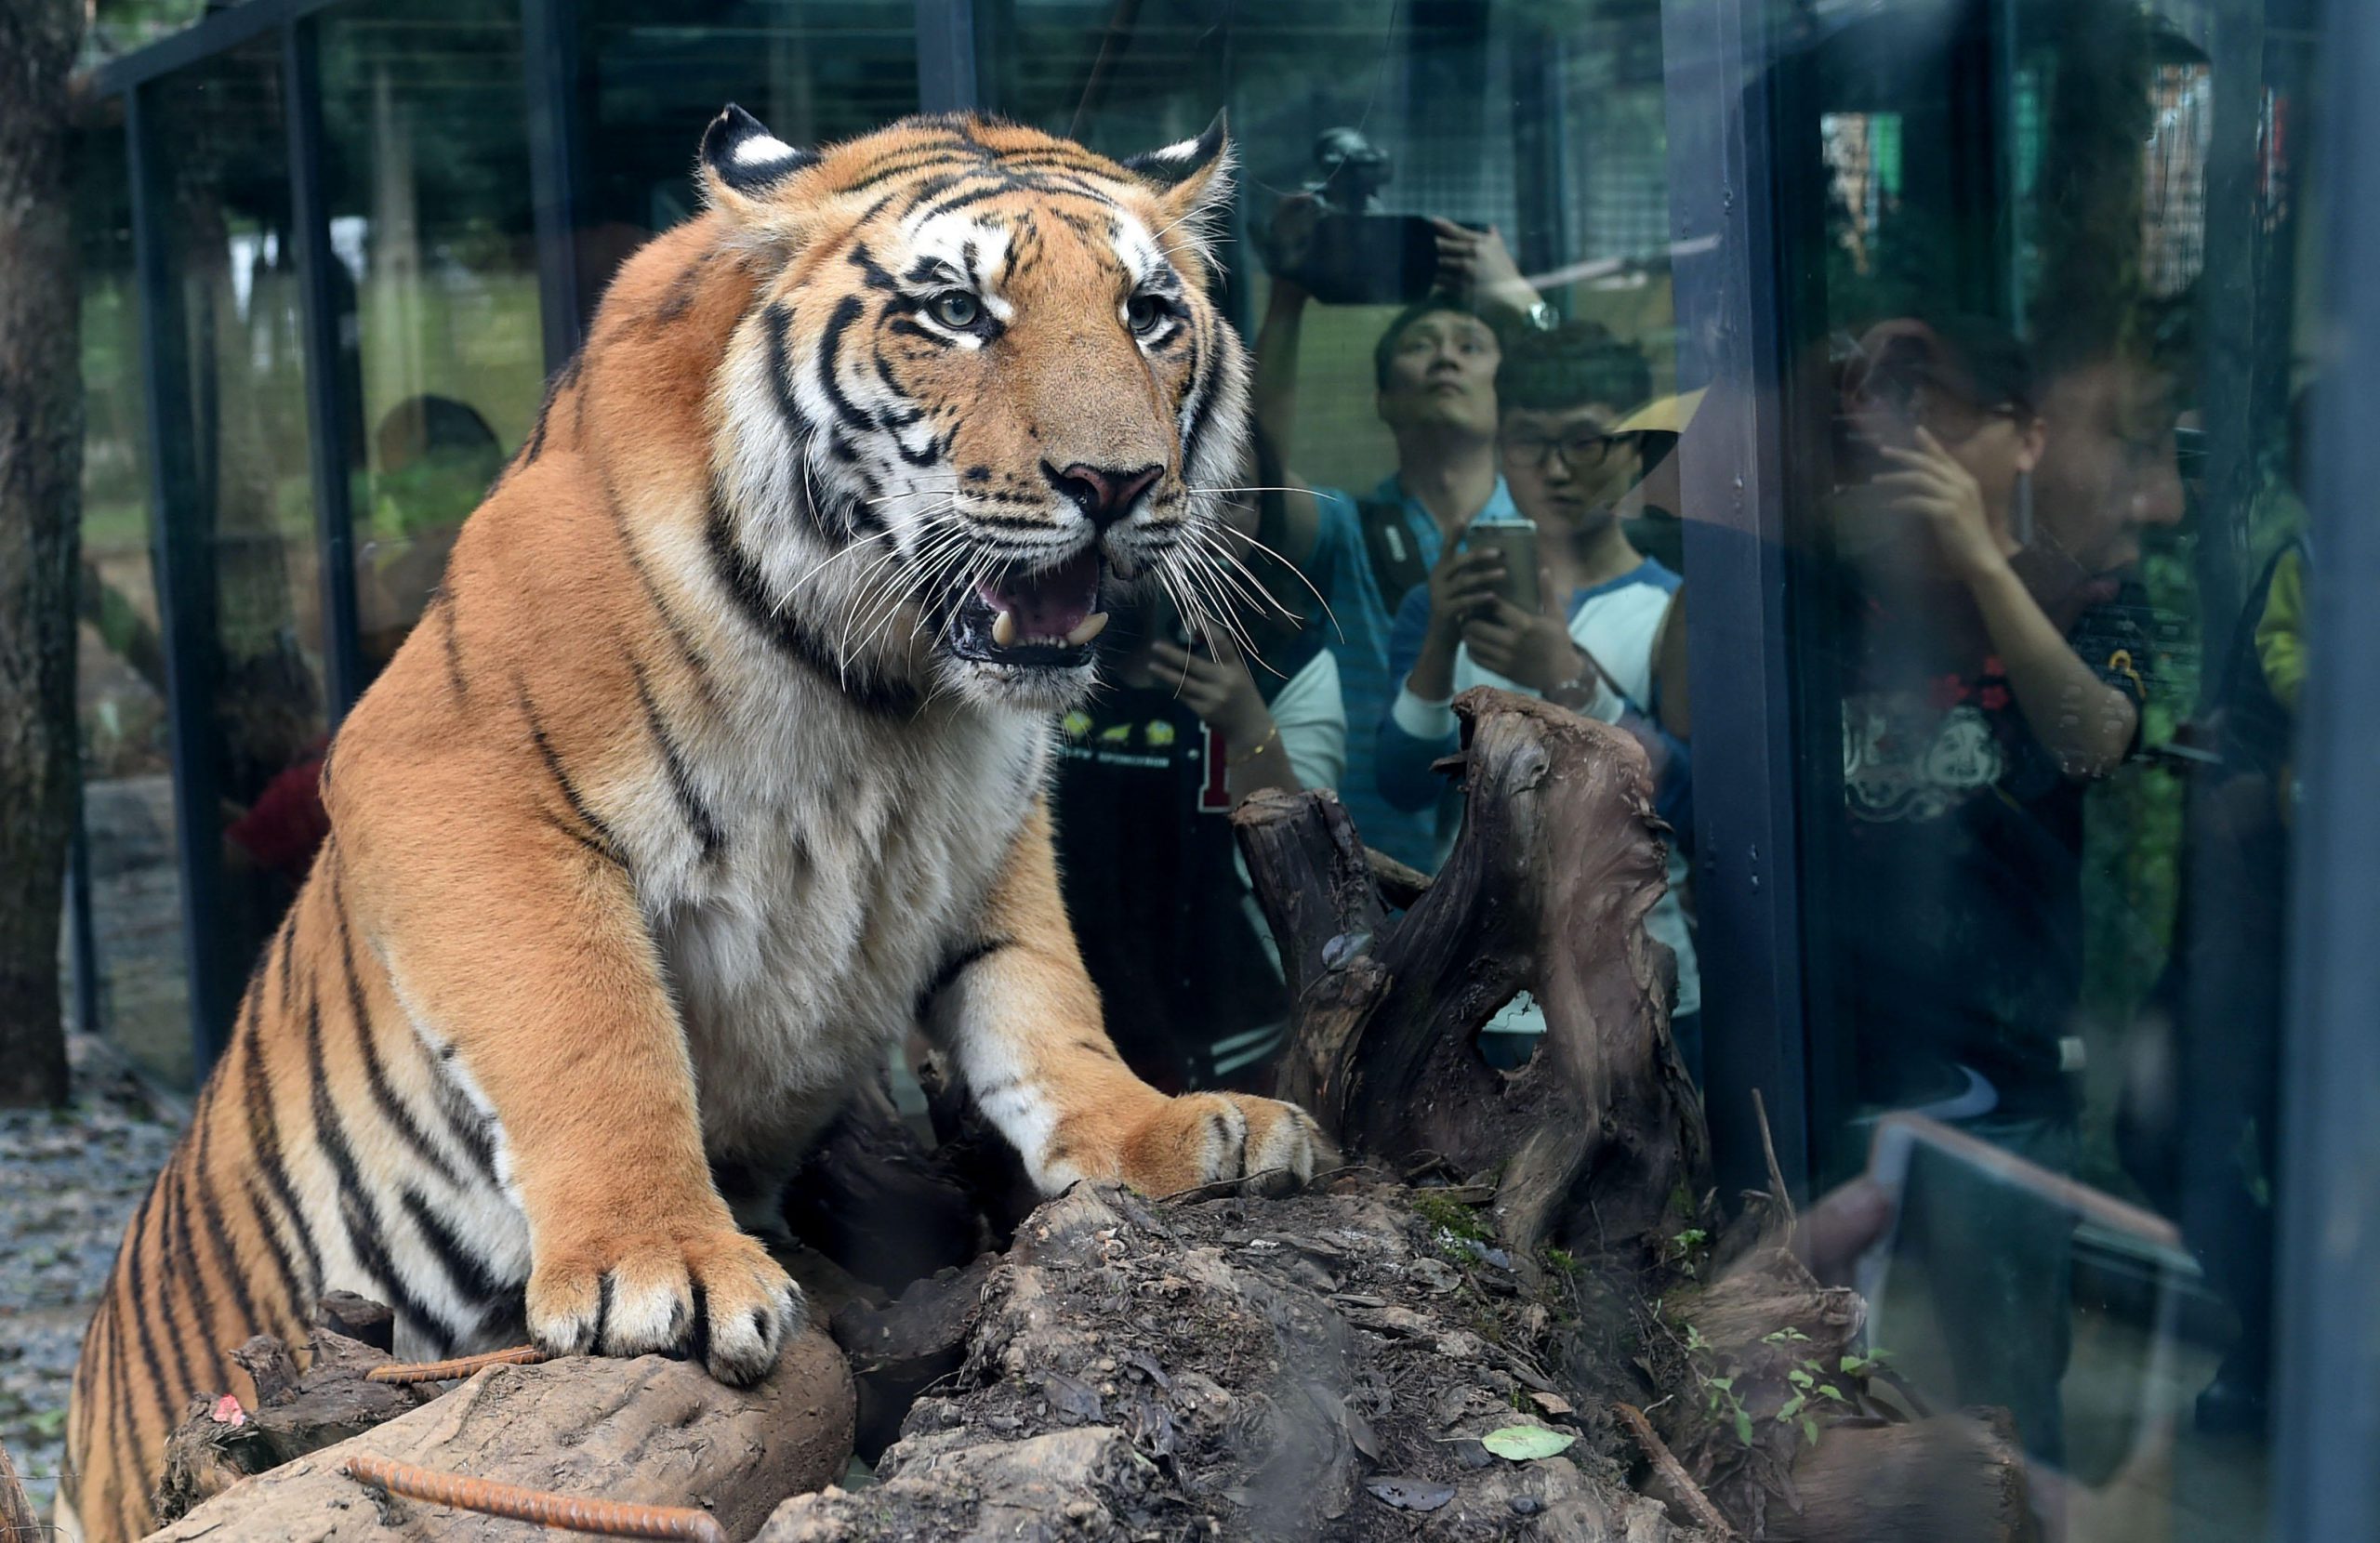 Uncertainty for tigers under China's new wildlife law | The Third Pole